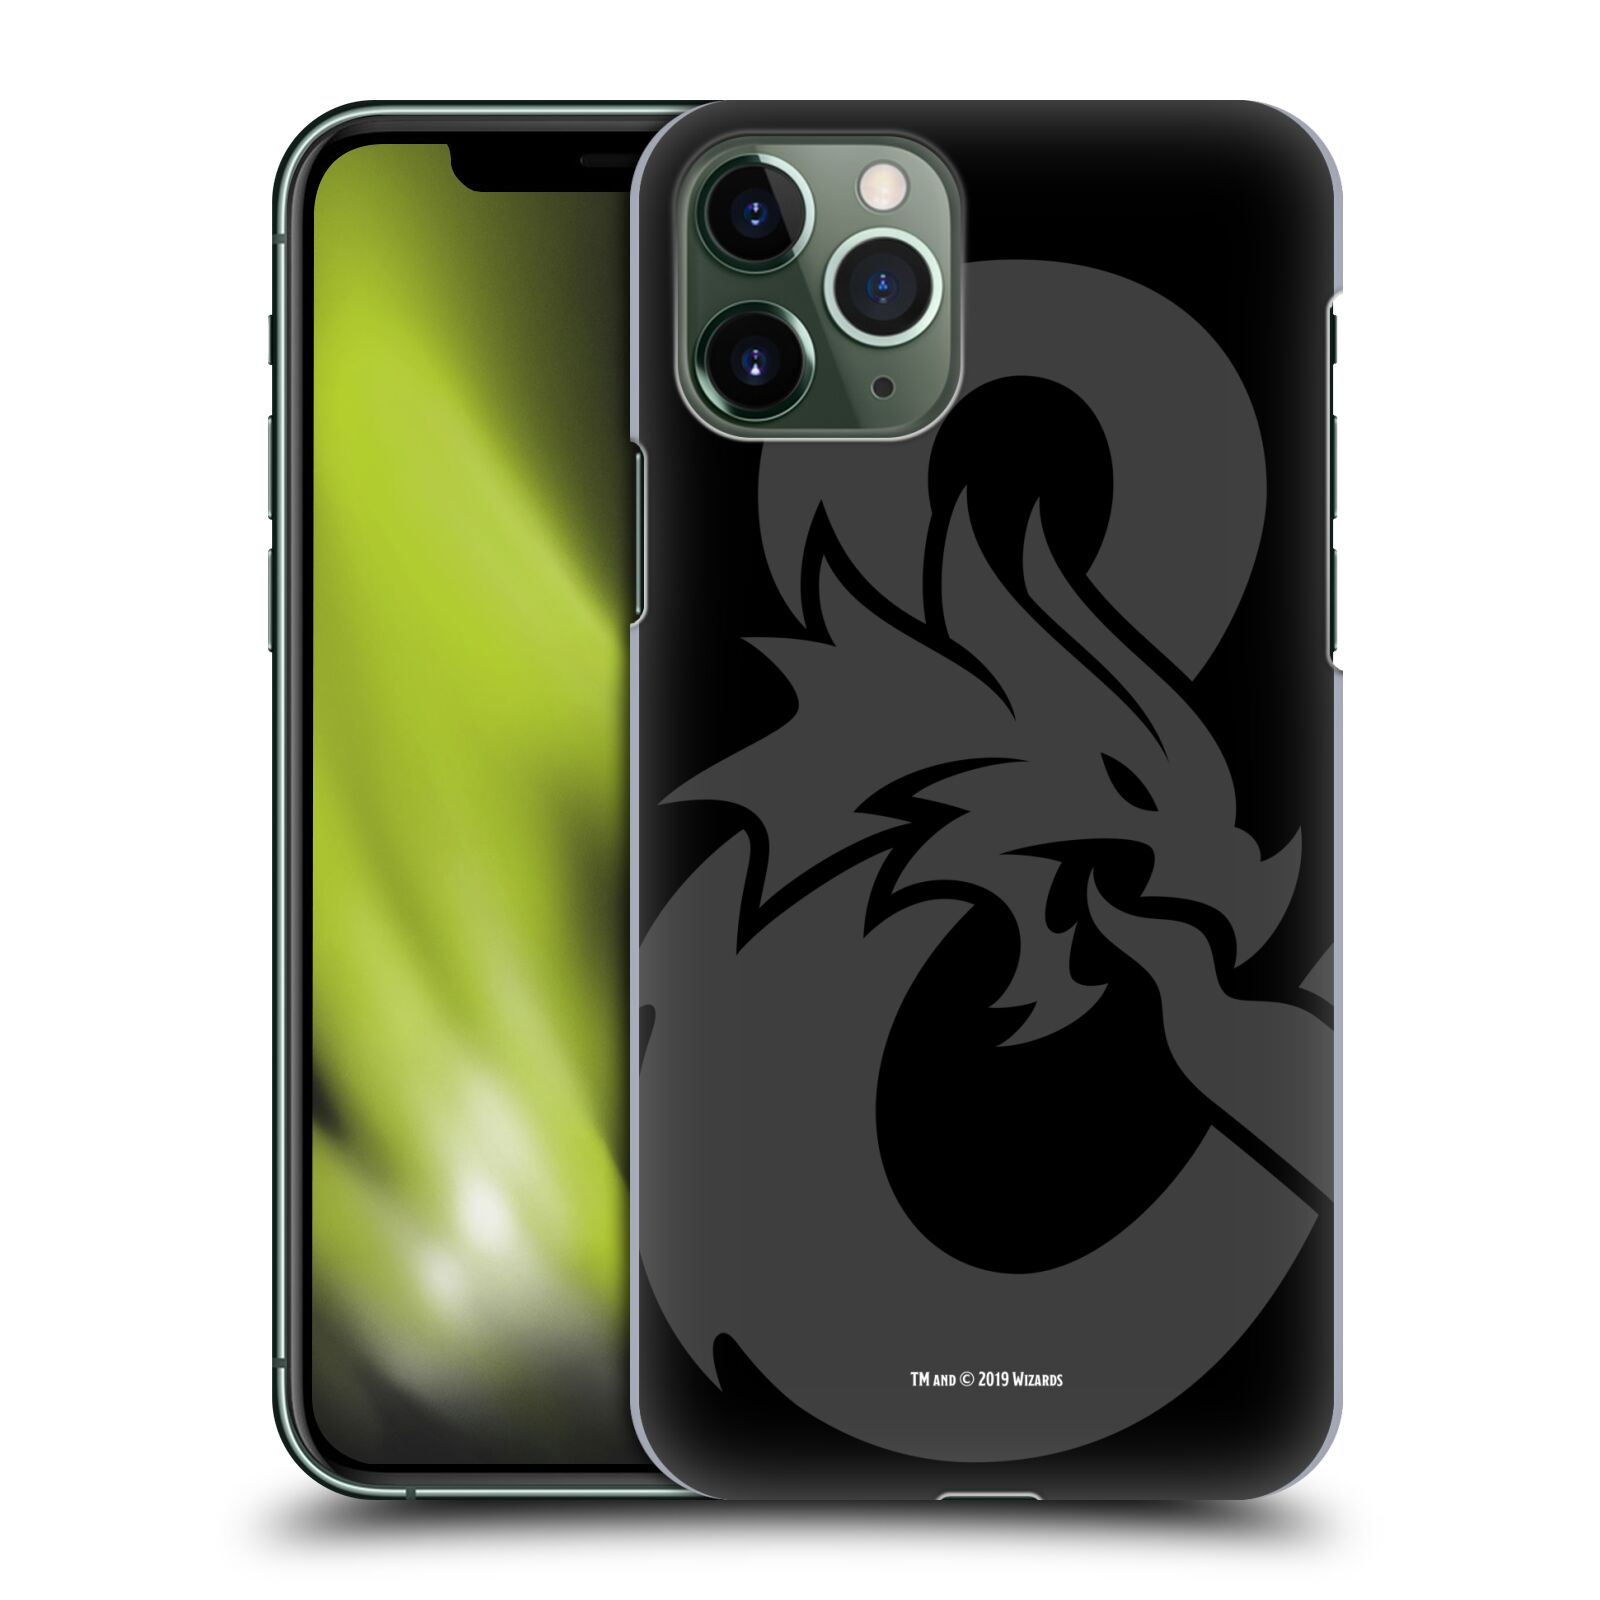 Zadní obal pro mobil Apple Iphone 11 PRO - HEAD CASE - Fantasy - Dungeons and Dragons - Znak